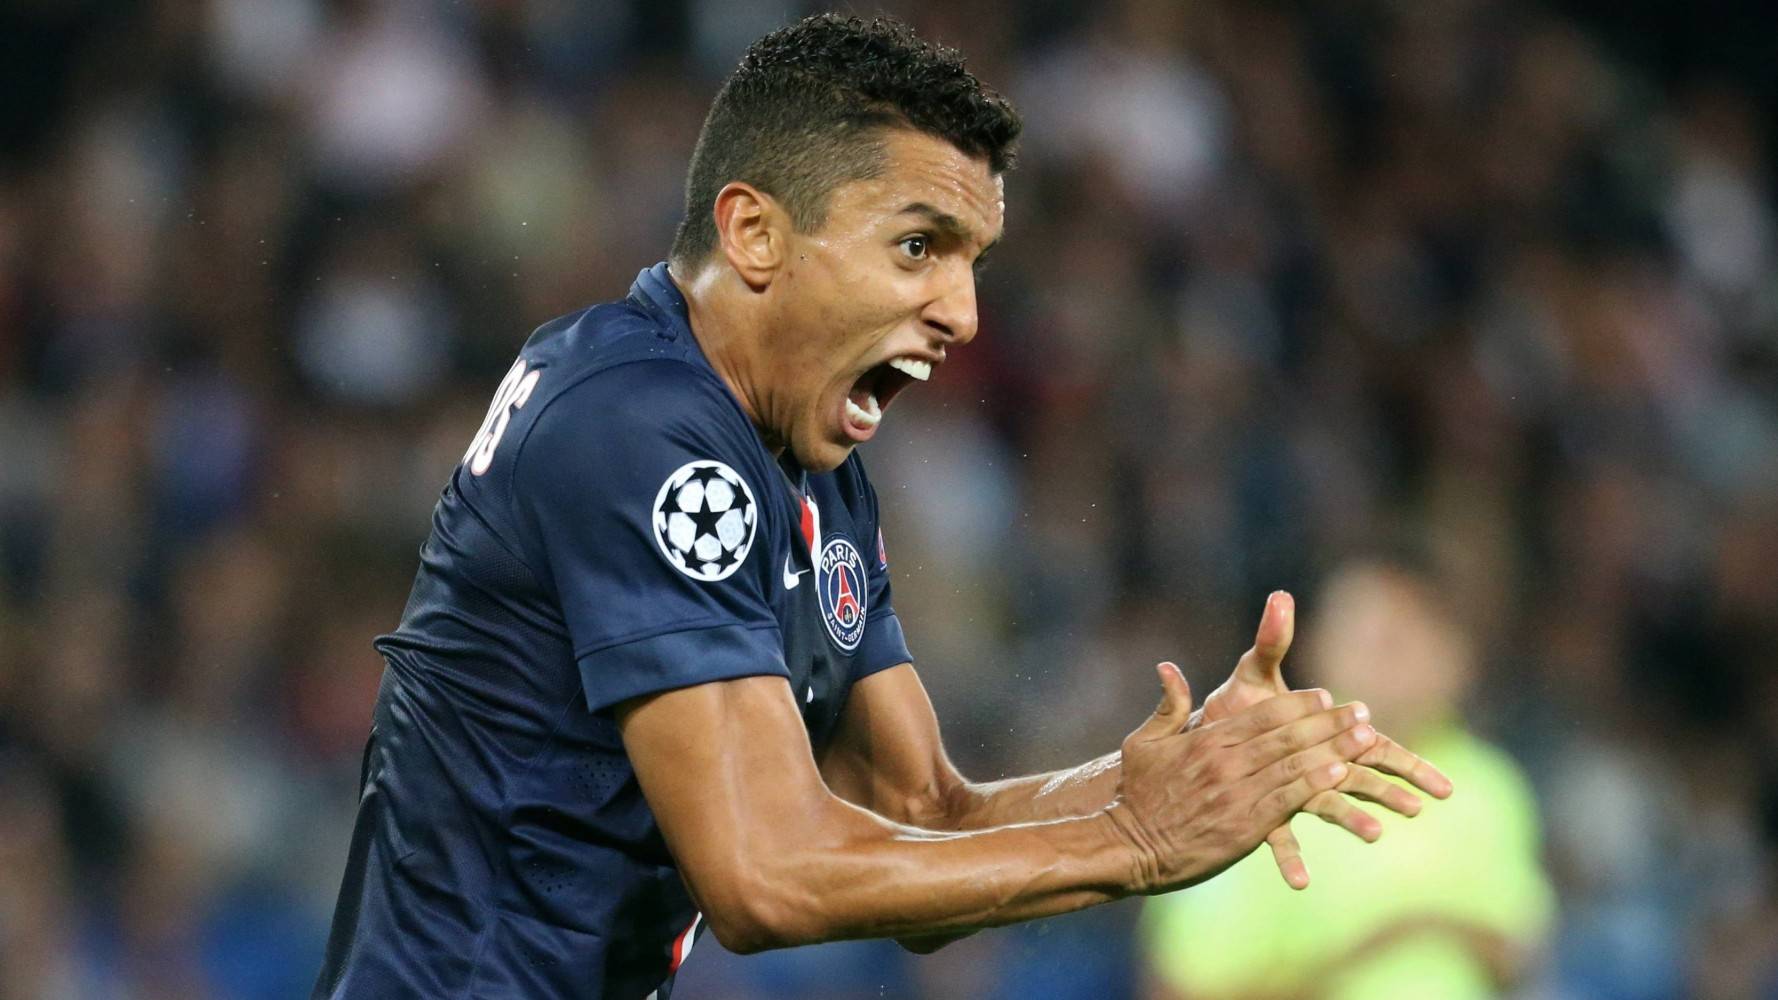 Marquinhos, protesting an action in a party of this season